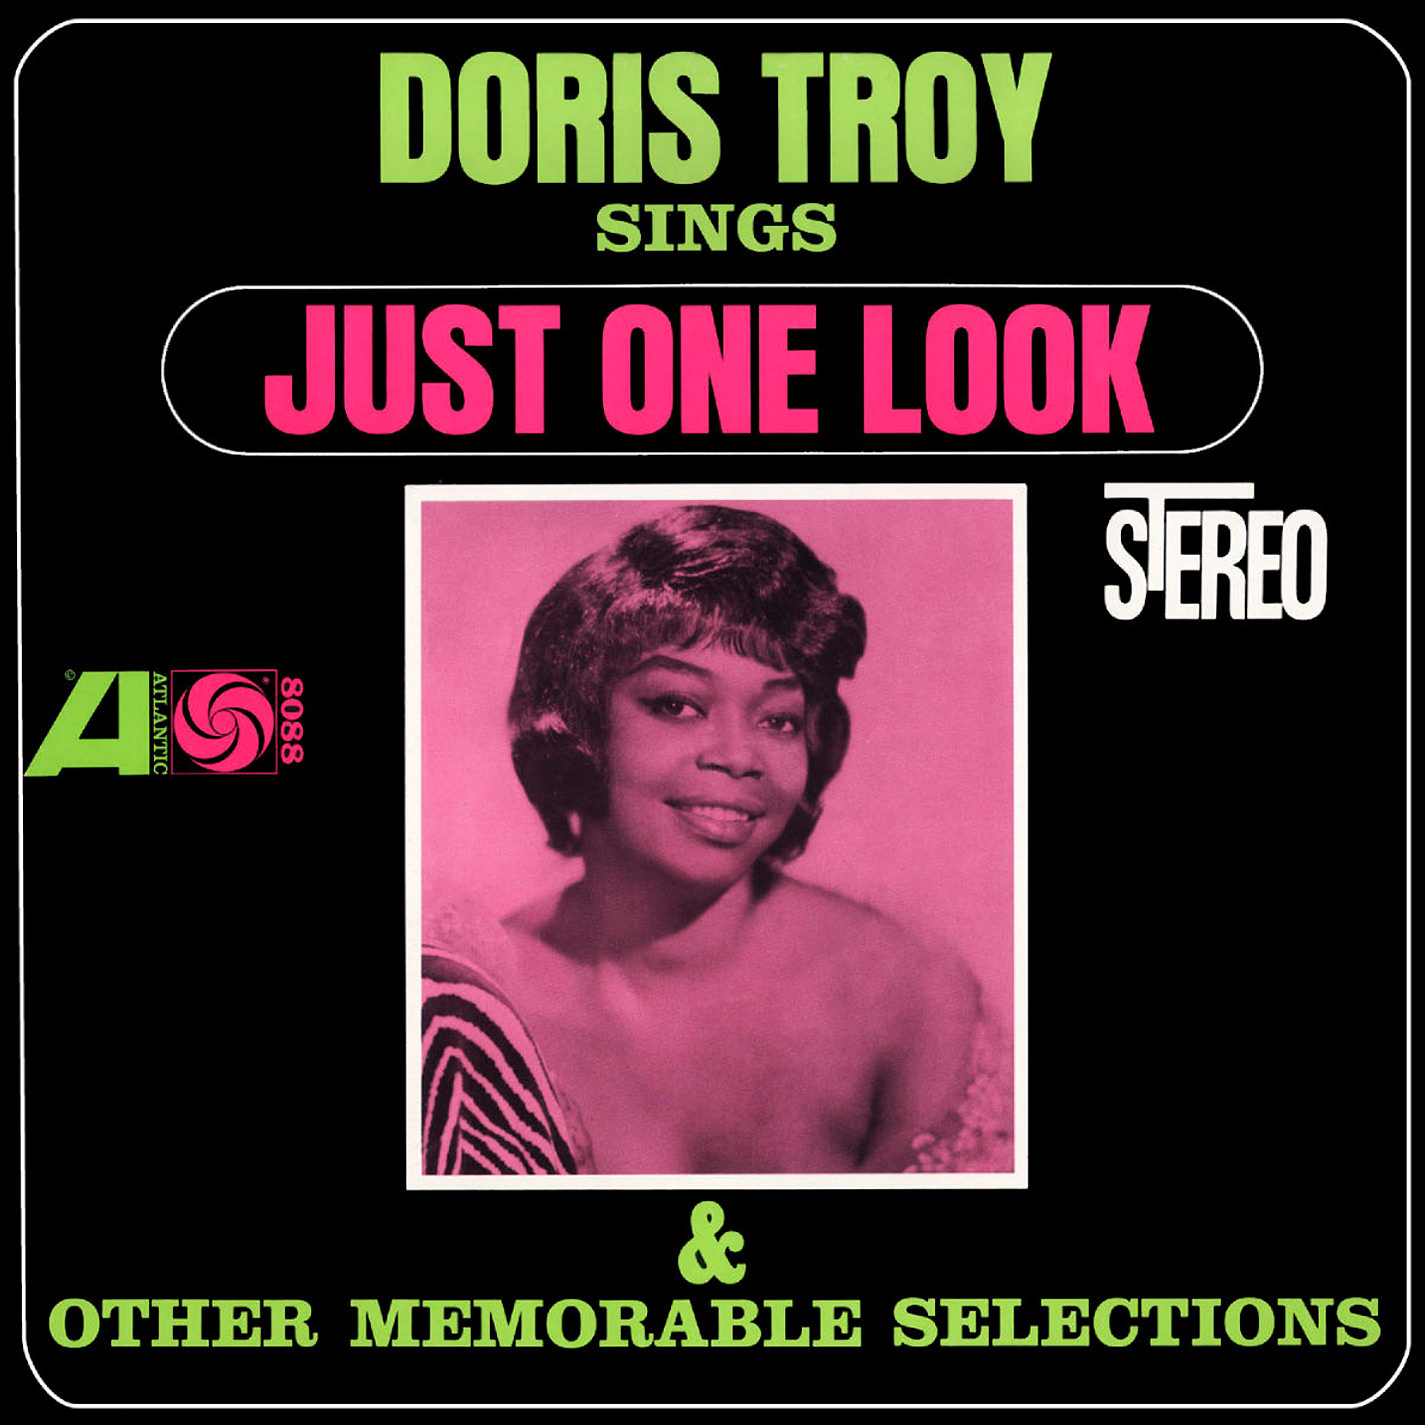 Doris Troy – Sings Just One Look And Other Memorable Selections (1963/2012) [HDTracks FLAC 24bit/96kHz]